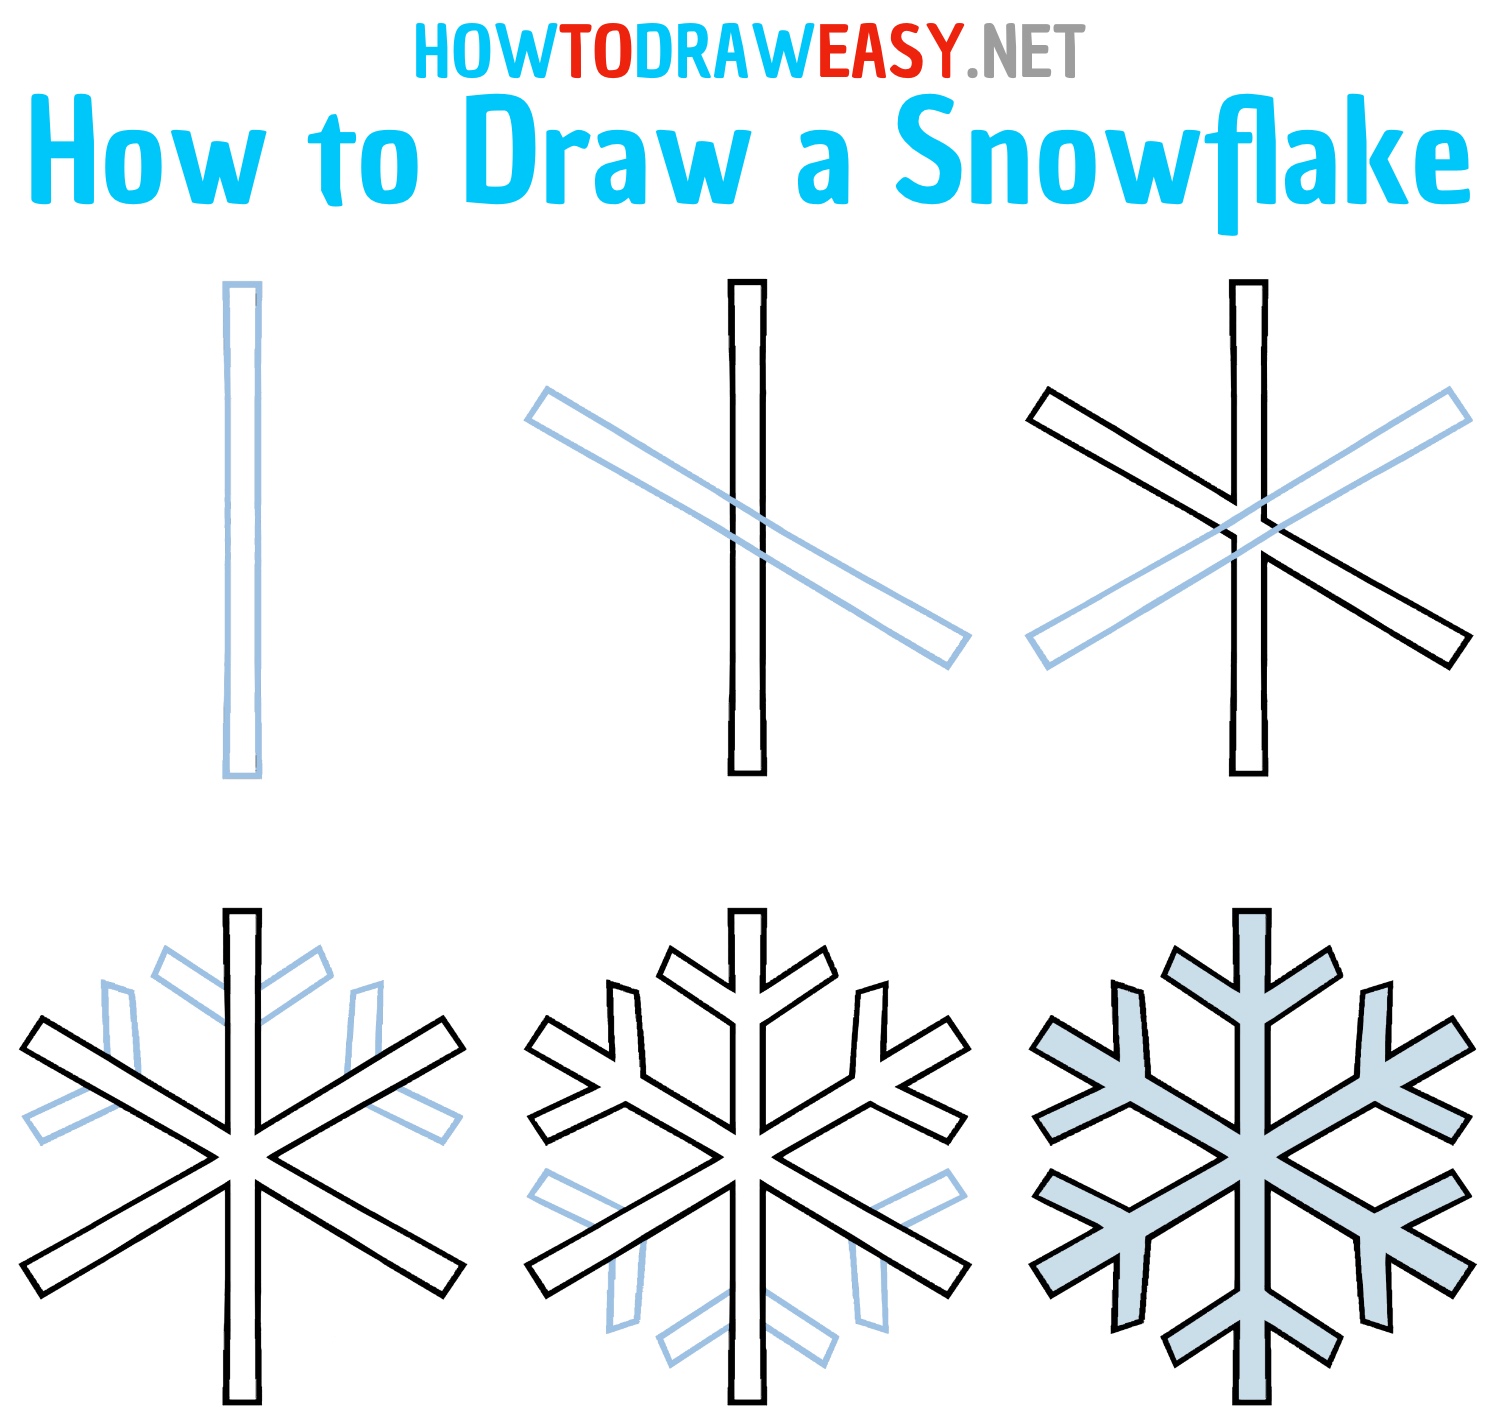 How to Draw a Snowflake Step by Step